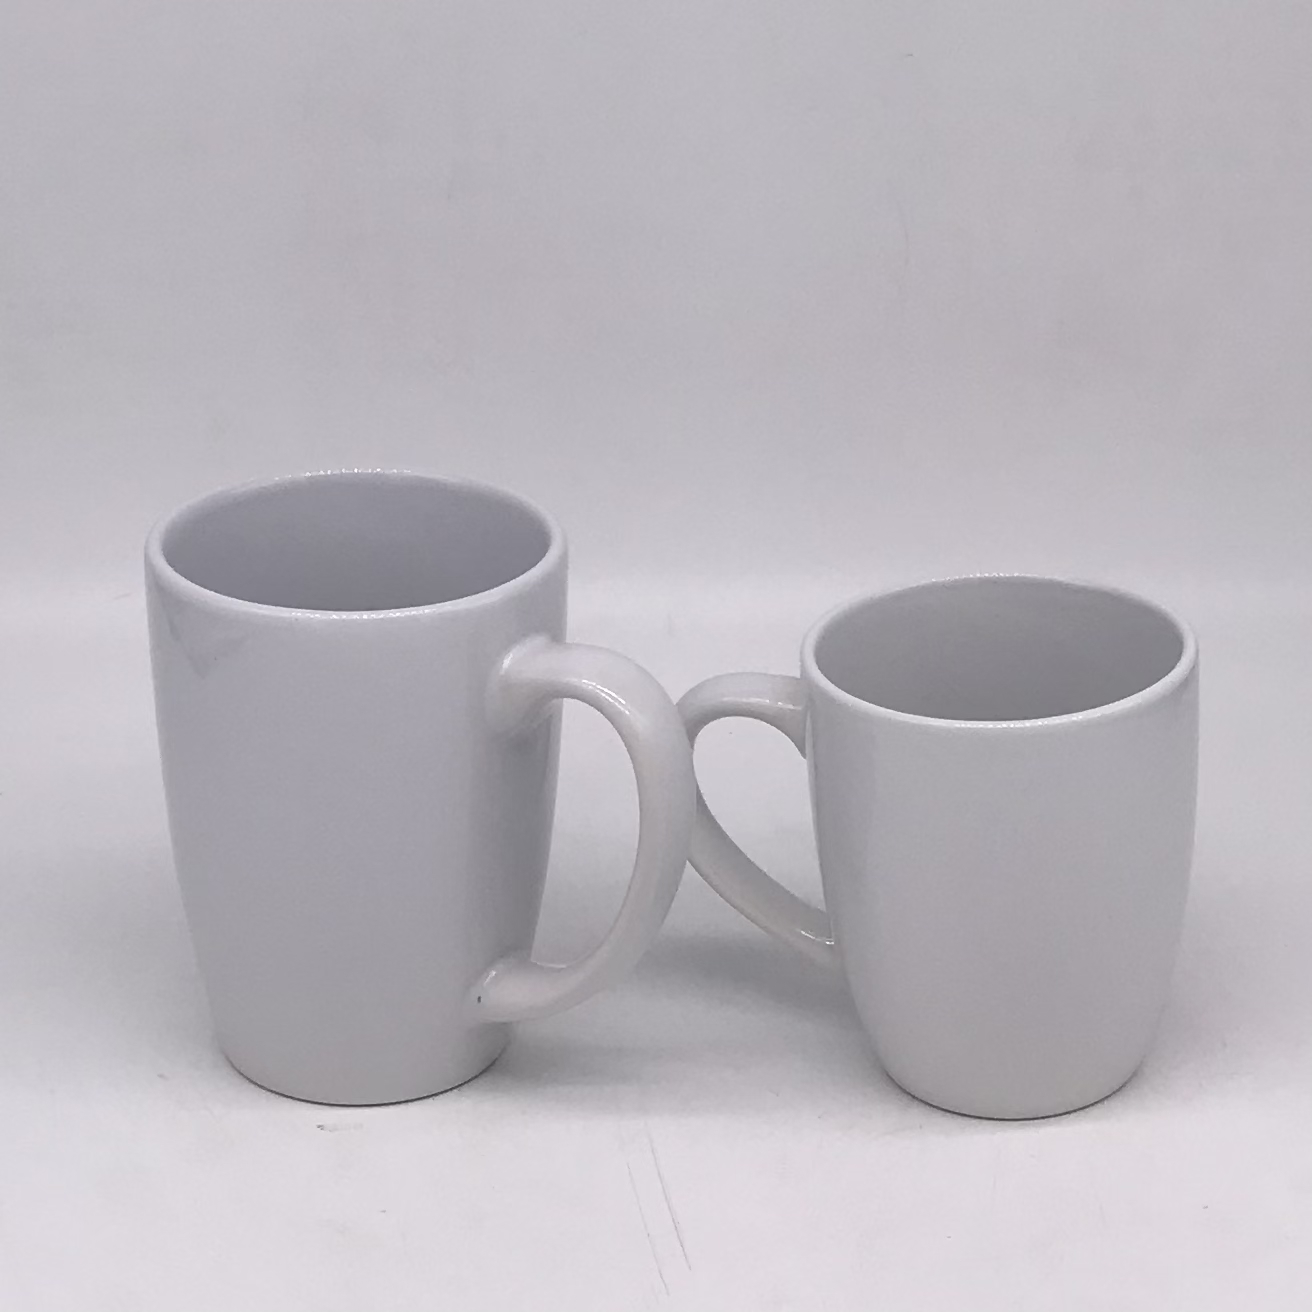 Blank Porcelain Mugs and Cups, Plain White and Black Ceramic Sublimation Coffee Cups and Mugs